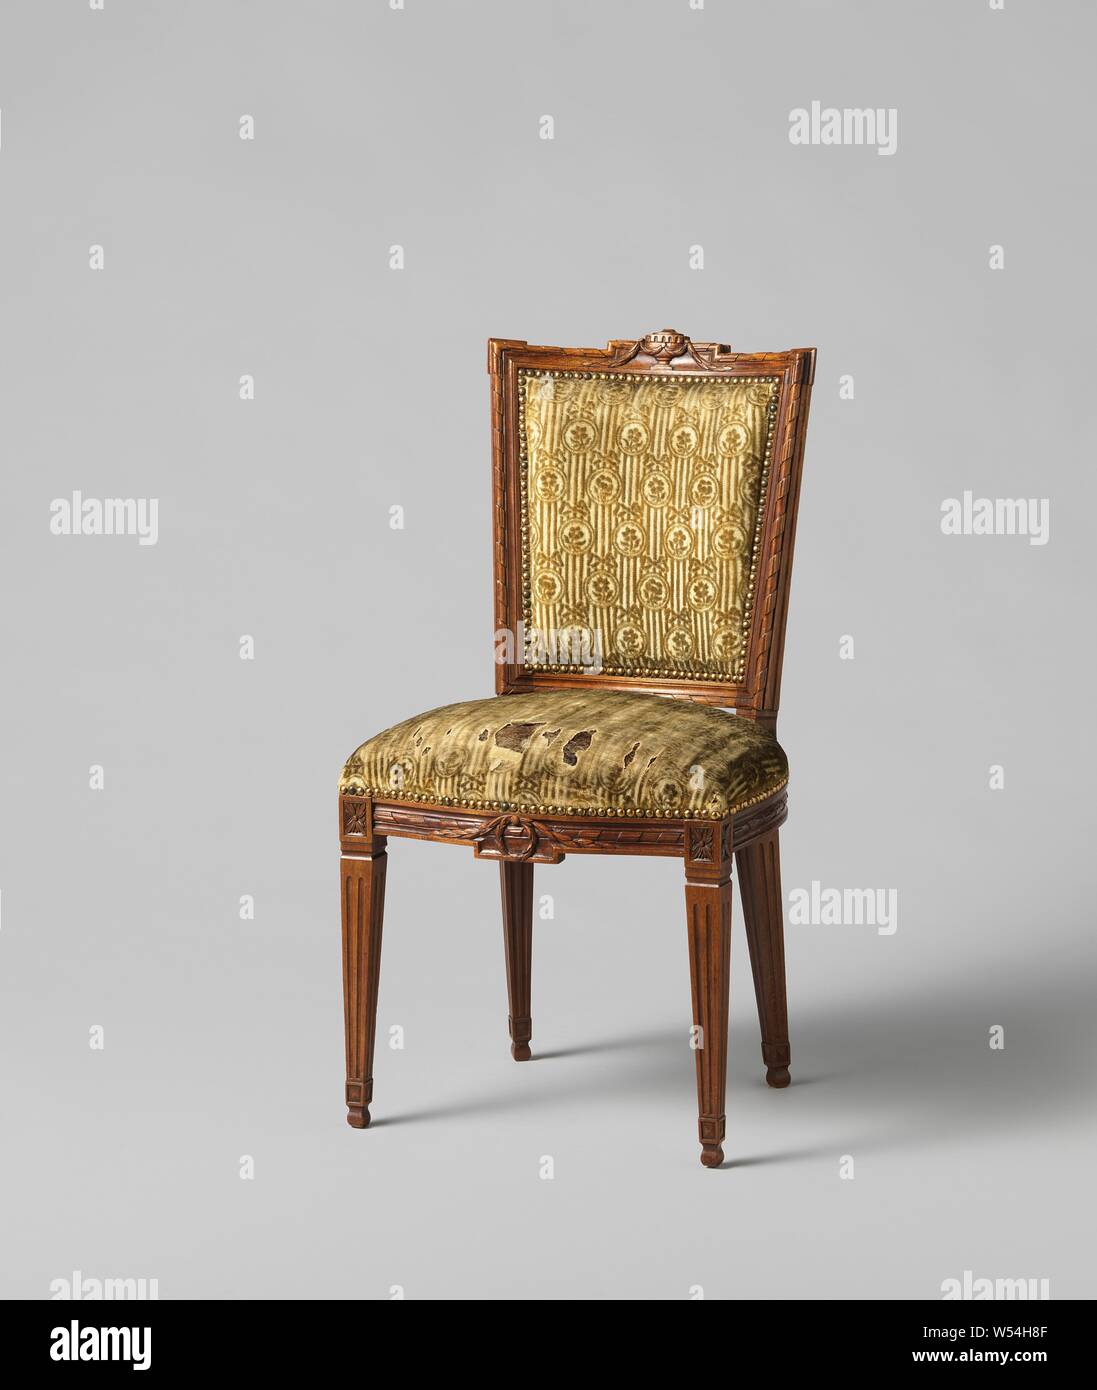 Armchair made of mahogany, covered with string with a continuous pattern of oval hanging flowers in which a flower on striped ground, covered with string with a continuous pattern of oval hanging flowers with a flower on it a striped ground. The square legs are fluted. The front line is decorated in the middle with a laurel wreath and a pendulum. The back frame is parallelogram-shaped and concave. The upper threshold is decorated with a stabbed vase and laurel garland. The cover is attached with nails with gold-plated heads. The chair belongs to an ameublement, anonymous, Northern Netherlands Stock Photo